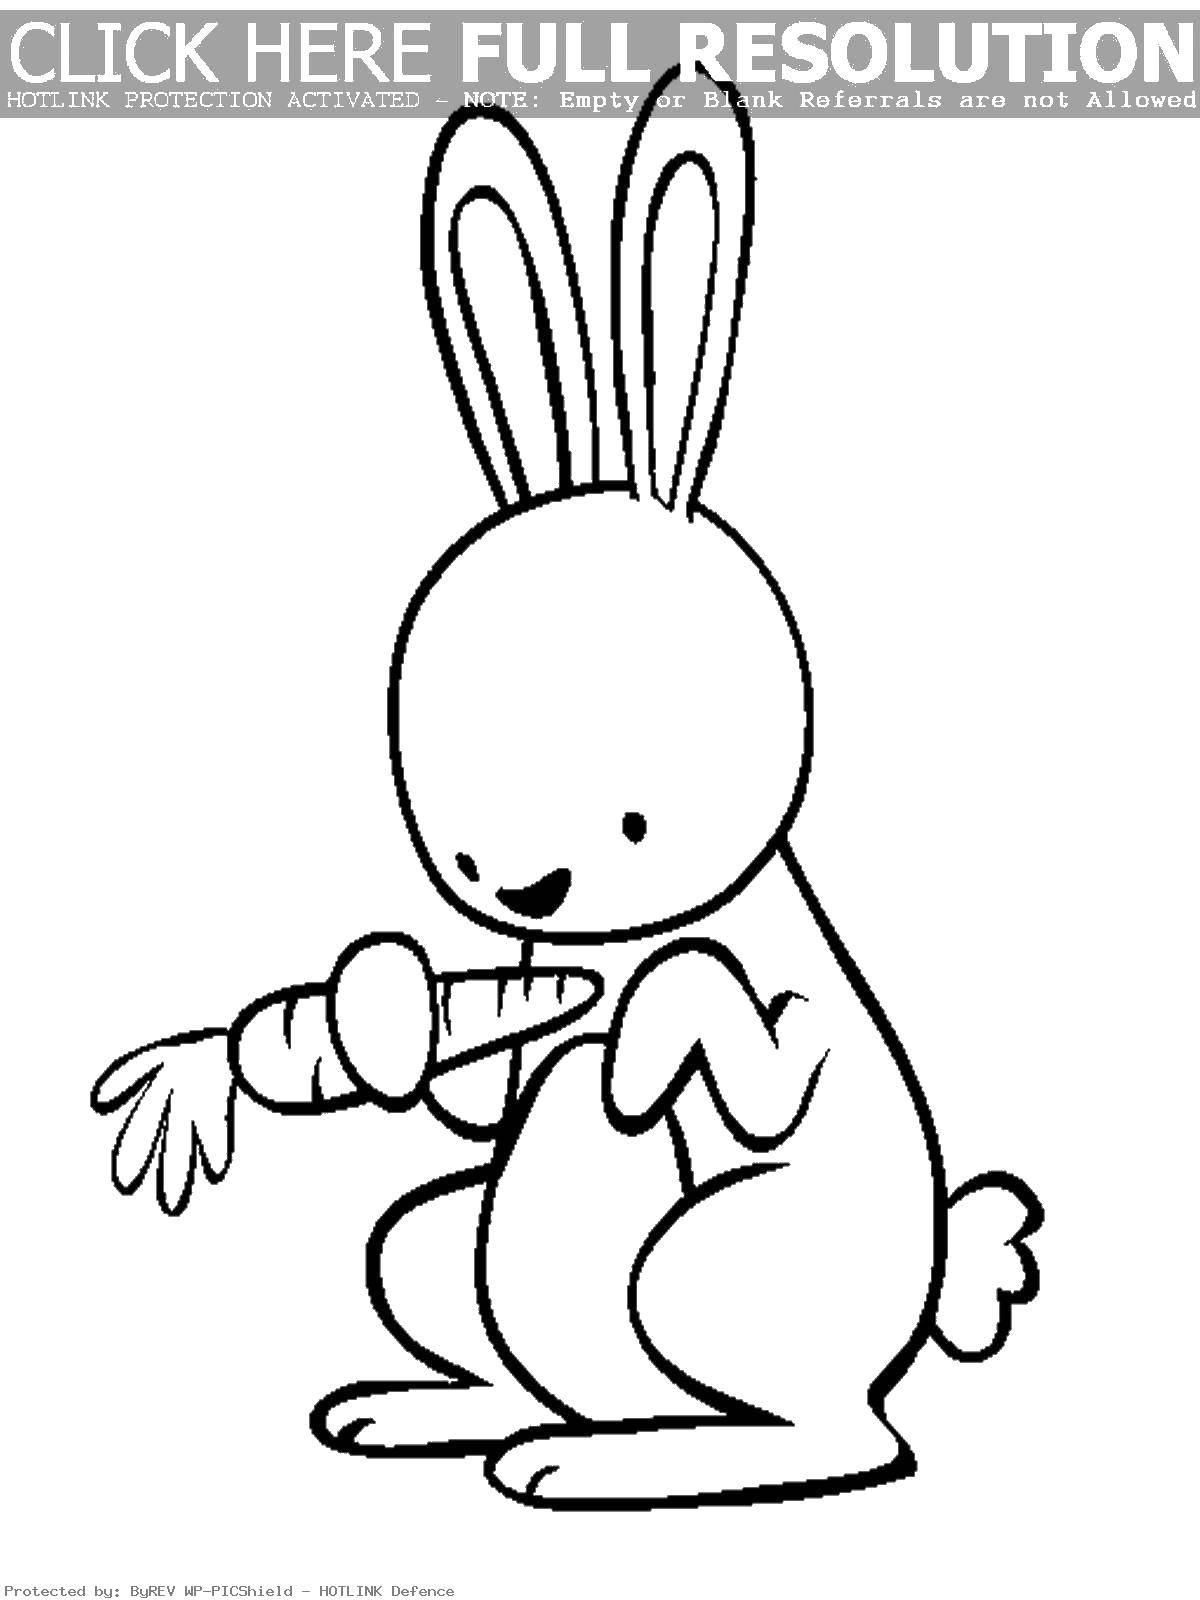 Coloring Carrot and rabbit. Category coloring. Tags:  rabbit, carrot, ears, tail.